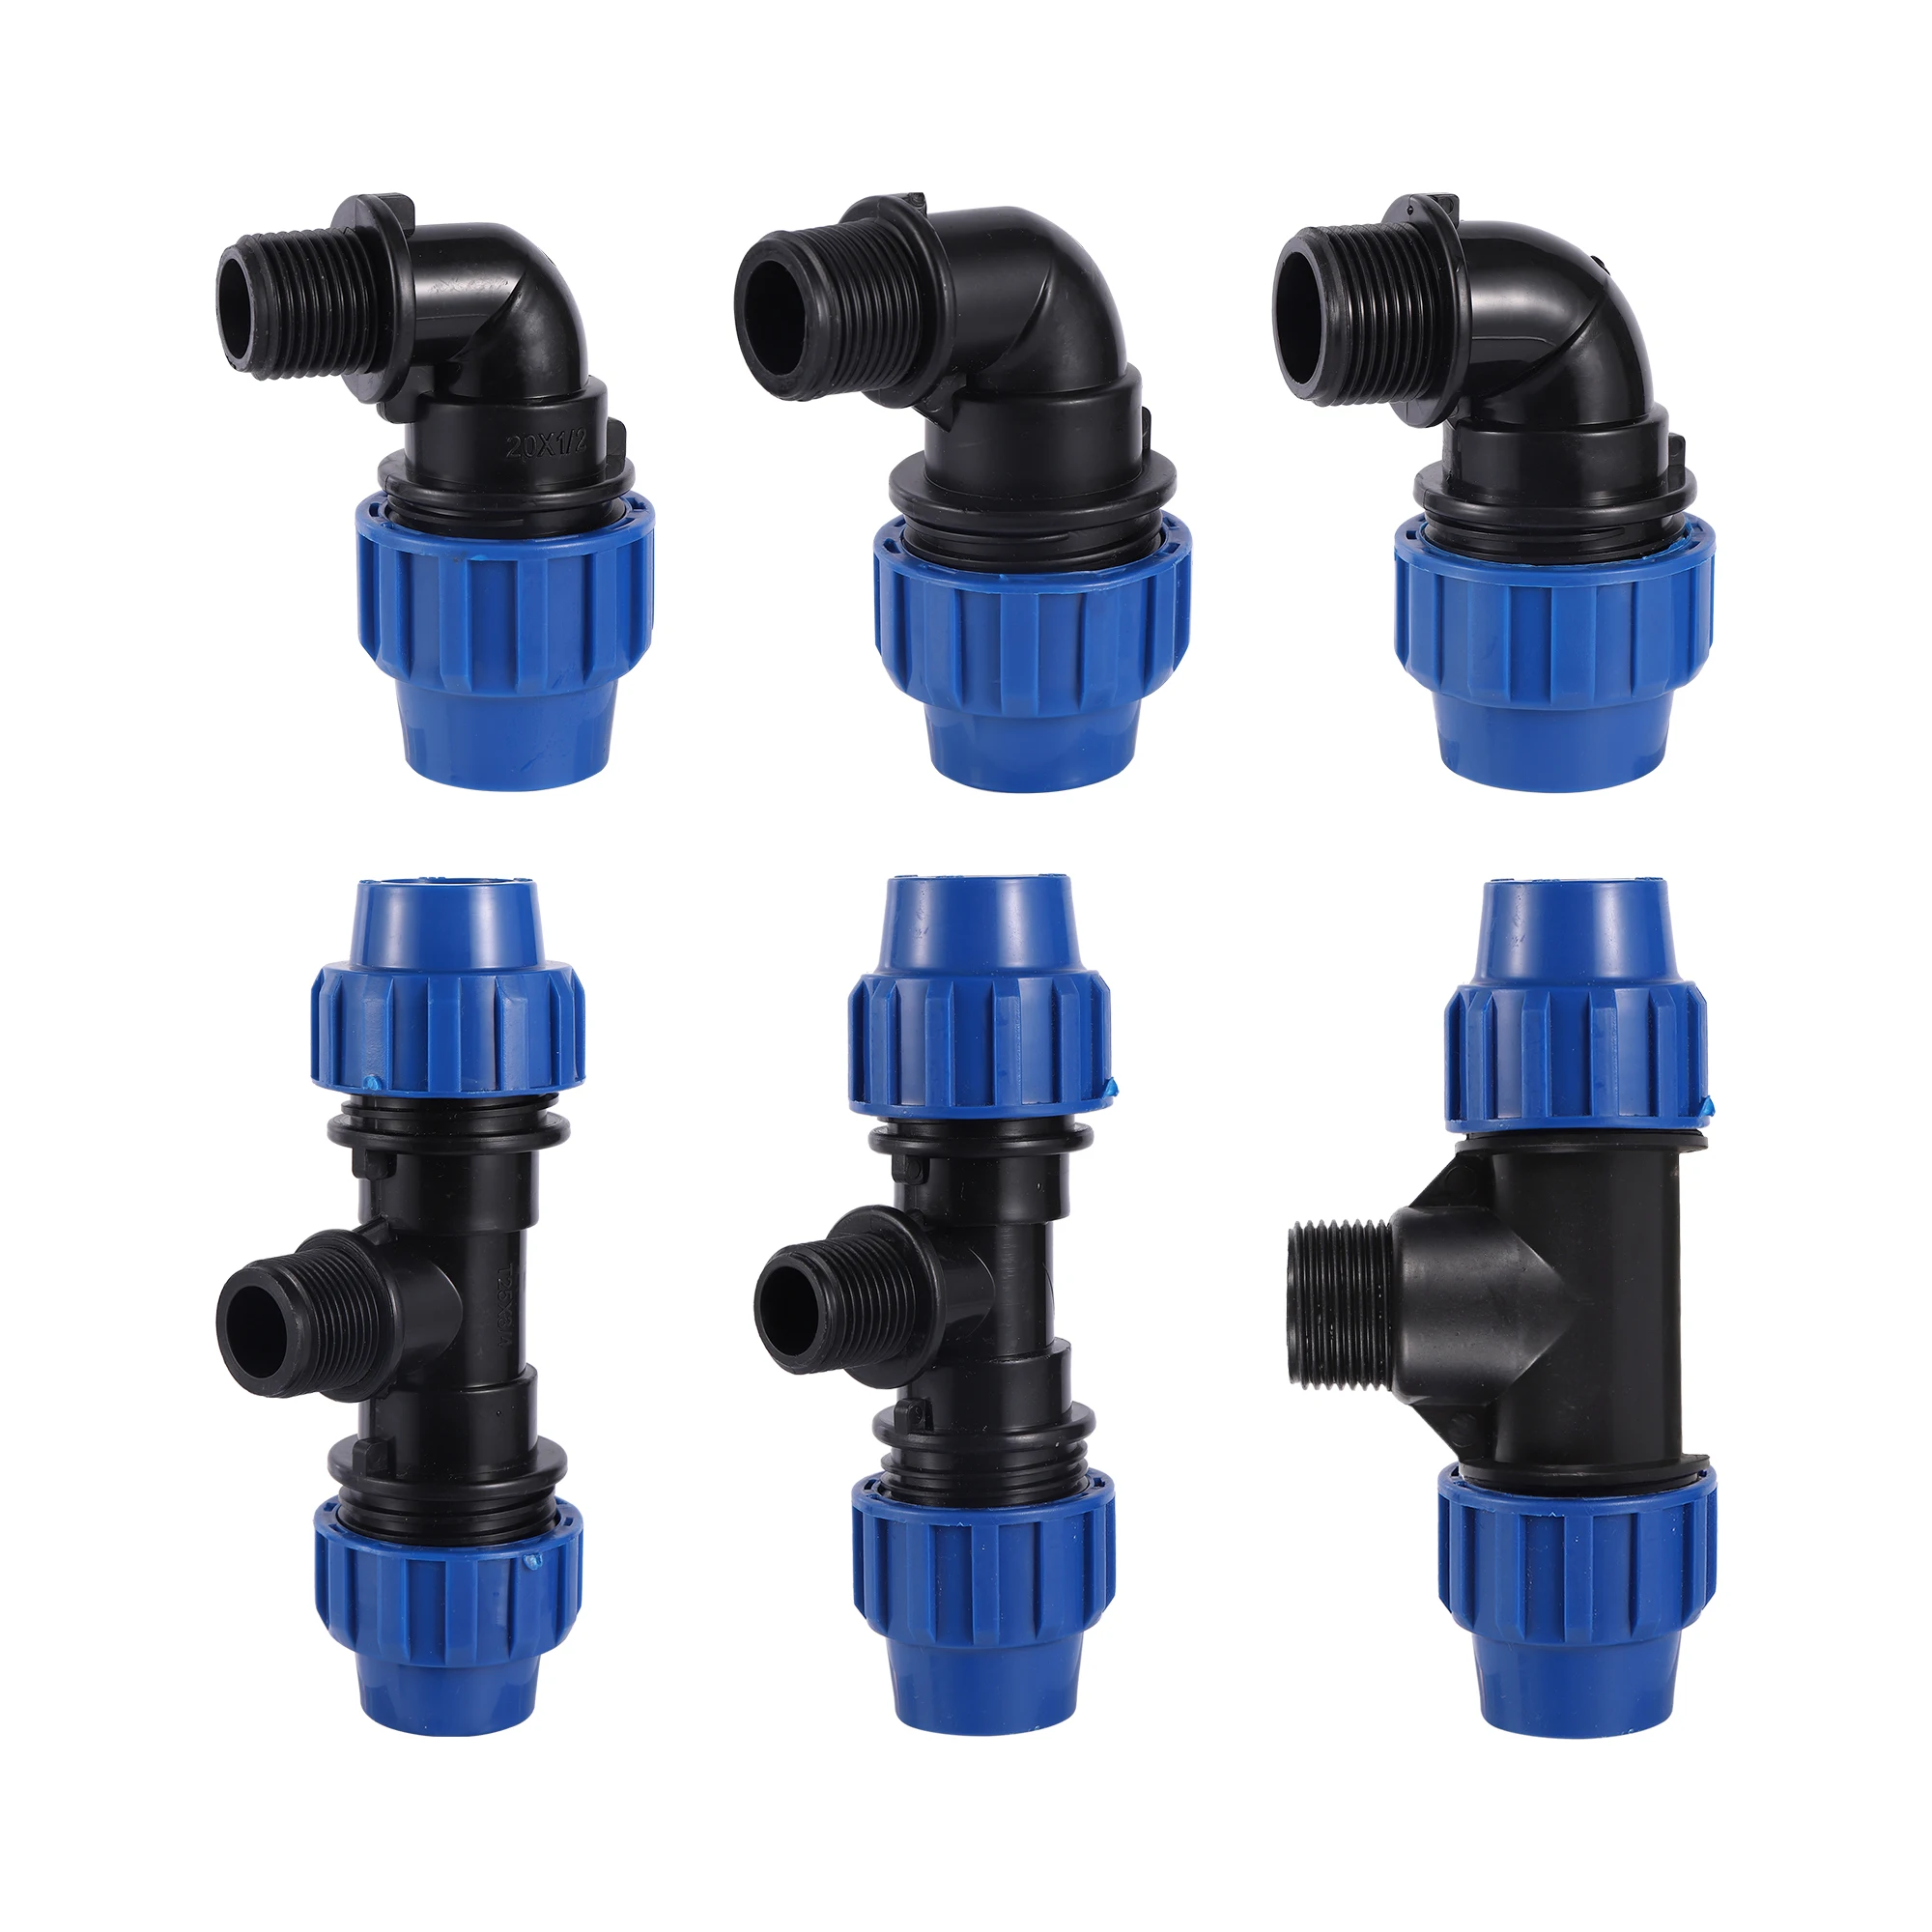 20/25/32mm to 1/2" 3/4" 1" Male PE Pipe Connector Adapter Elbow Tee Fittings Garden Agriculture Irrigation Pipe Fittings